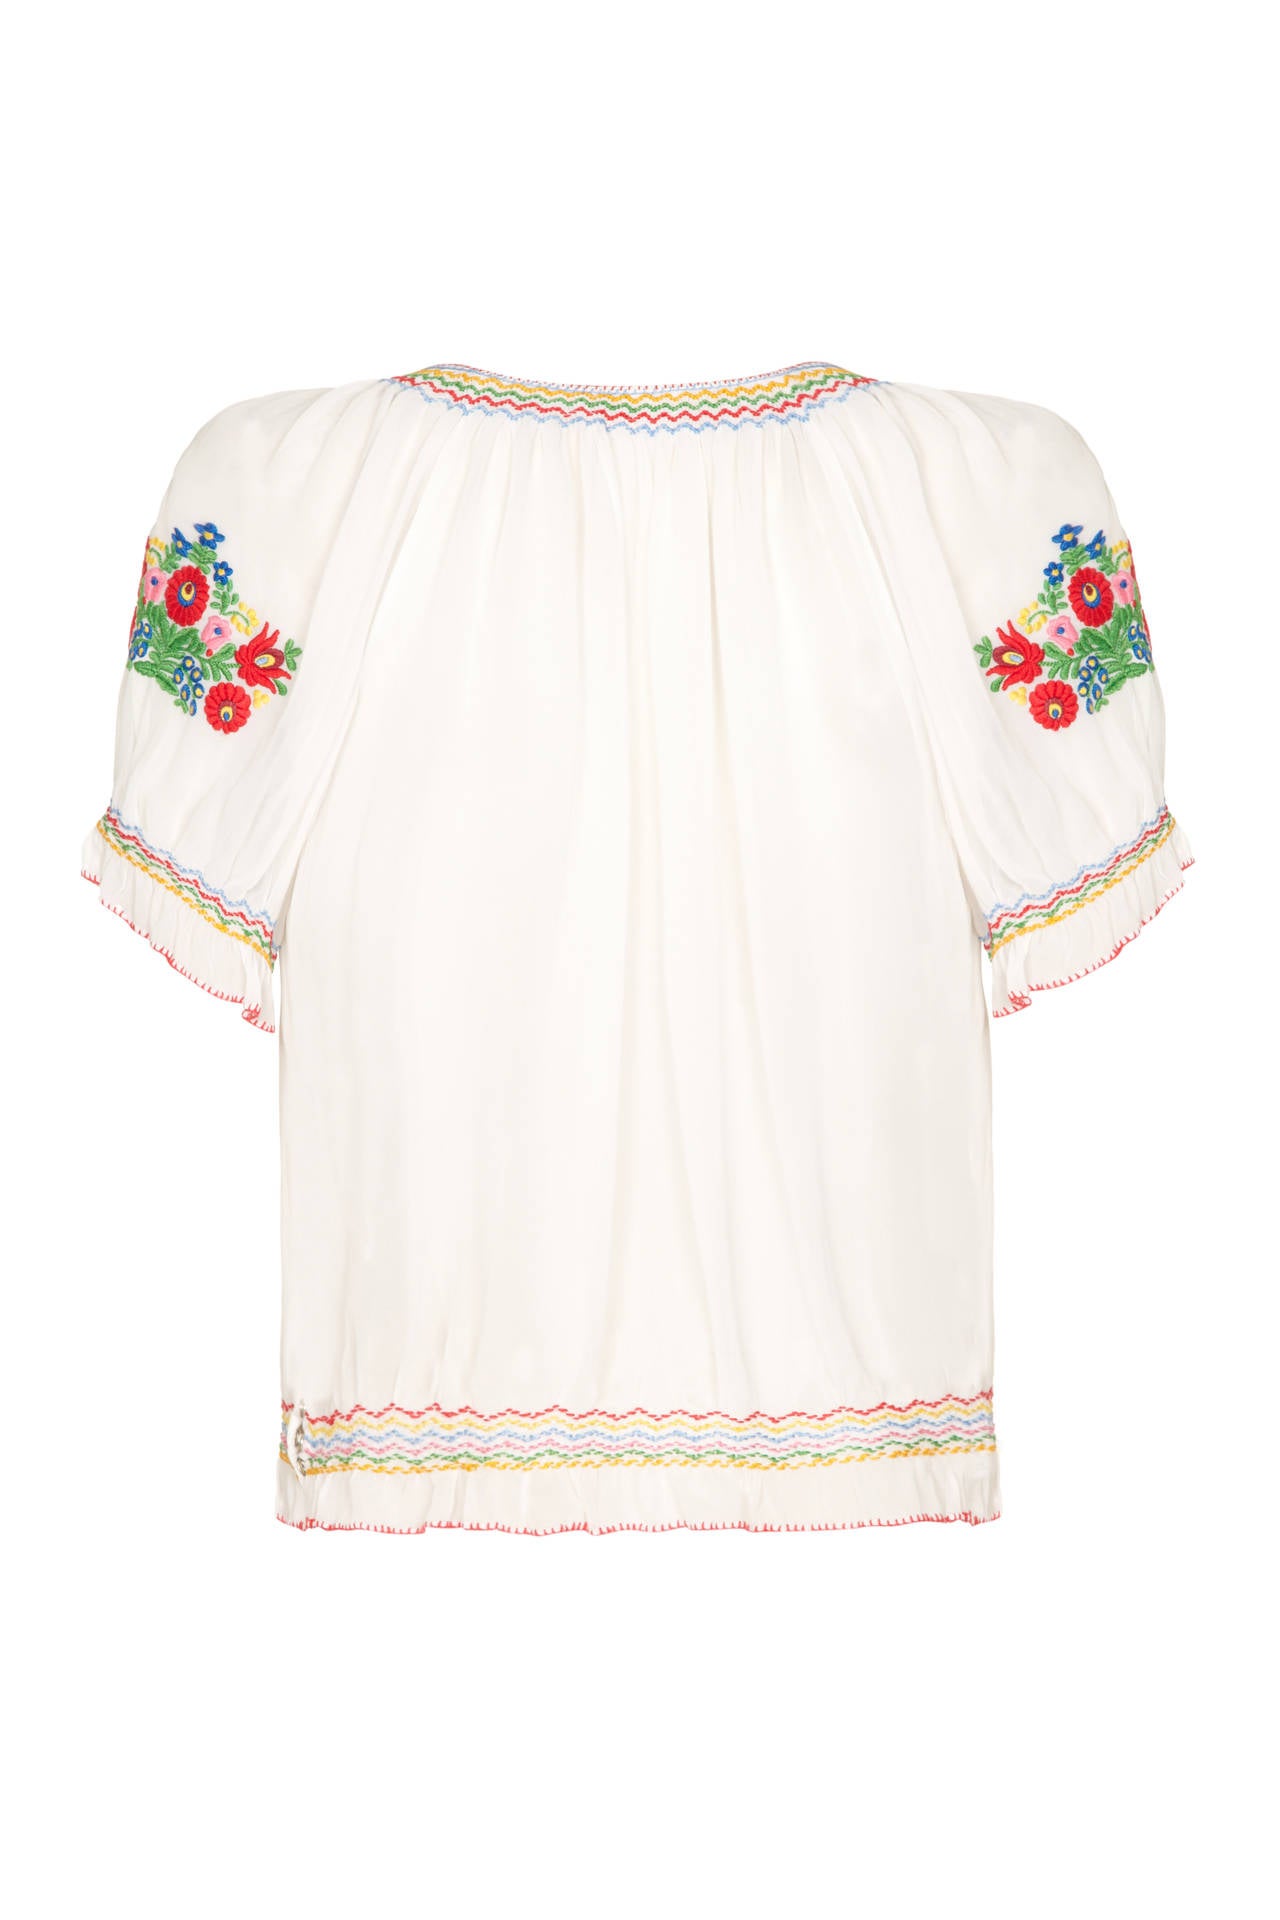 Beautiful white Hungarian blouse from the 1950s with lovely, multi-coloured floral embroidery.  This example is slightly sheer with short gathered sleeves, a tie at the neckline and is in excellent condition. It is a loose fitting style and